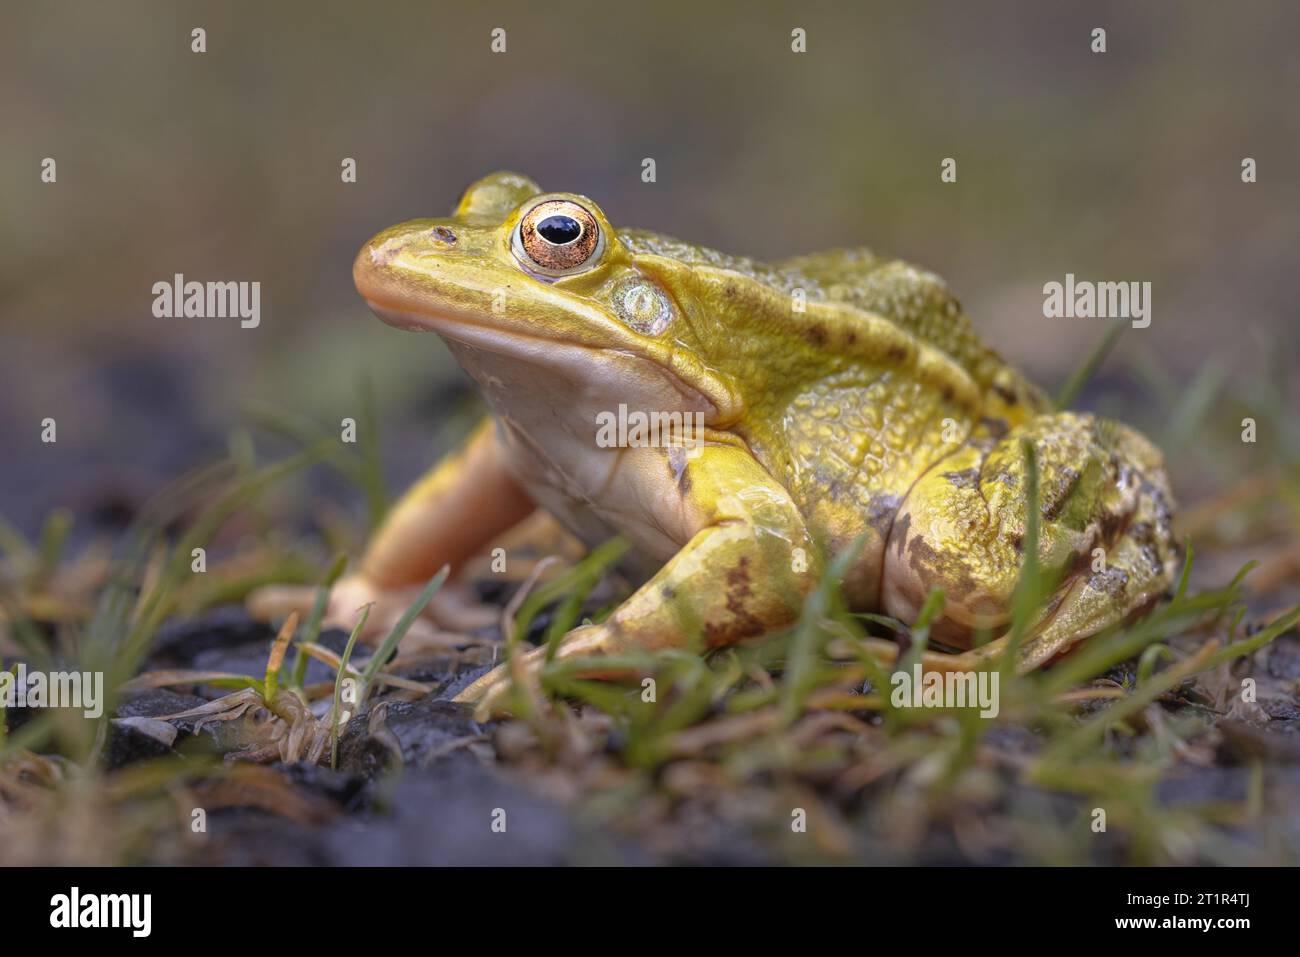 Pool Frog (Pelophylax lessonae) is a European frog in the family Ranidae. Reasons for declining populations are air pollution leading to over-nitrific Stock Photo